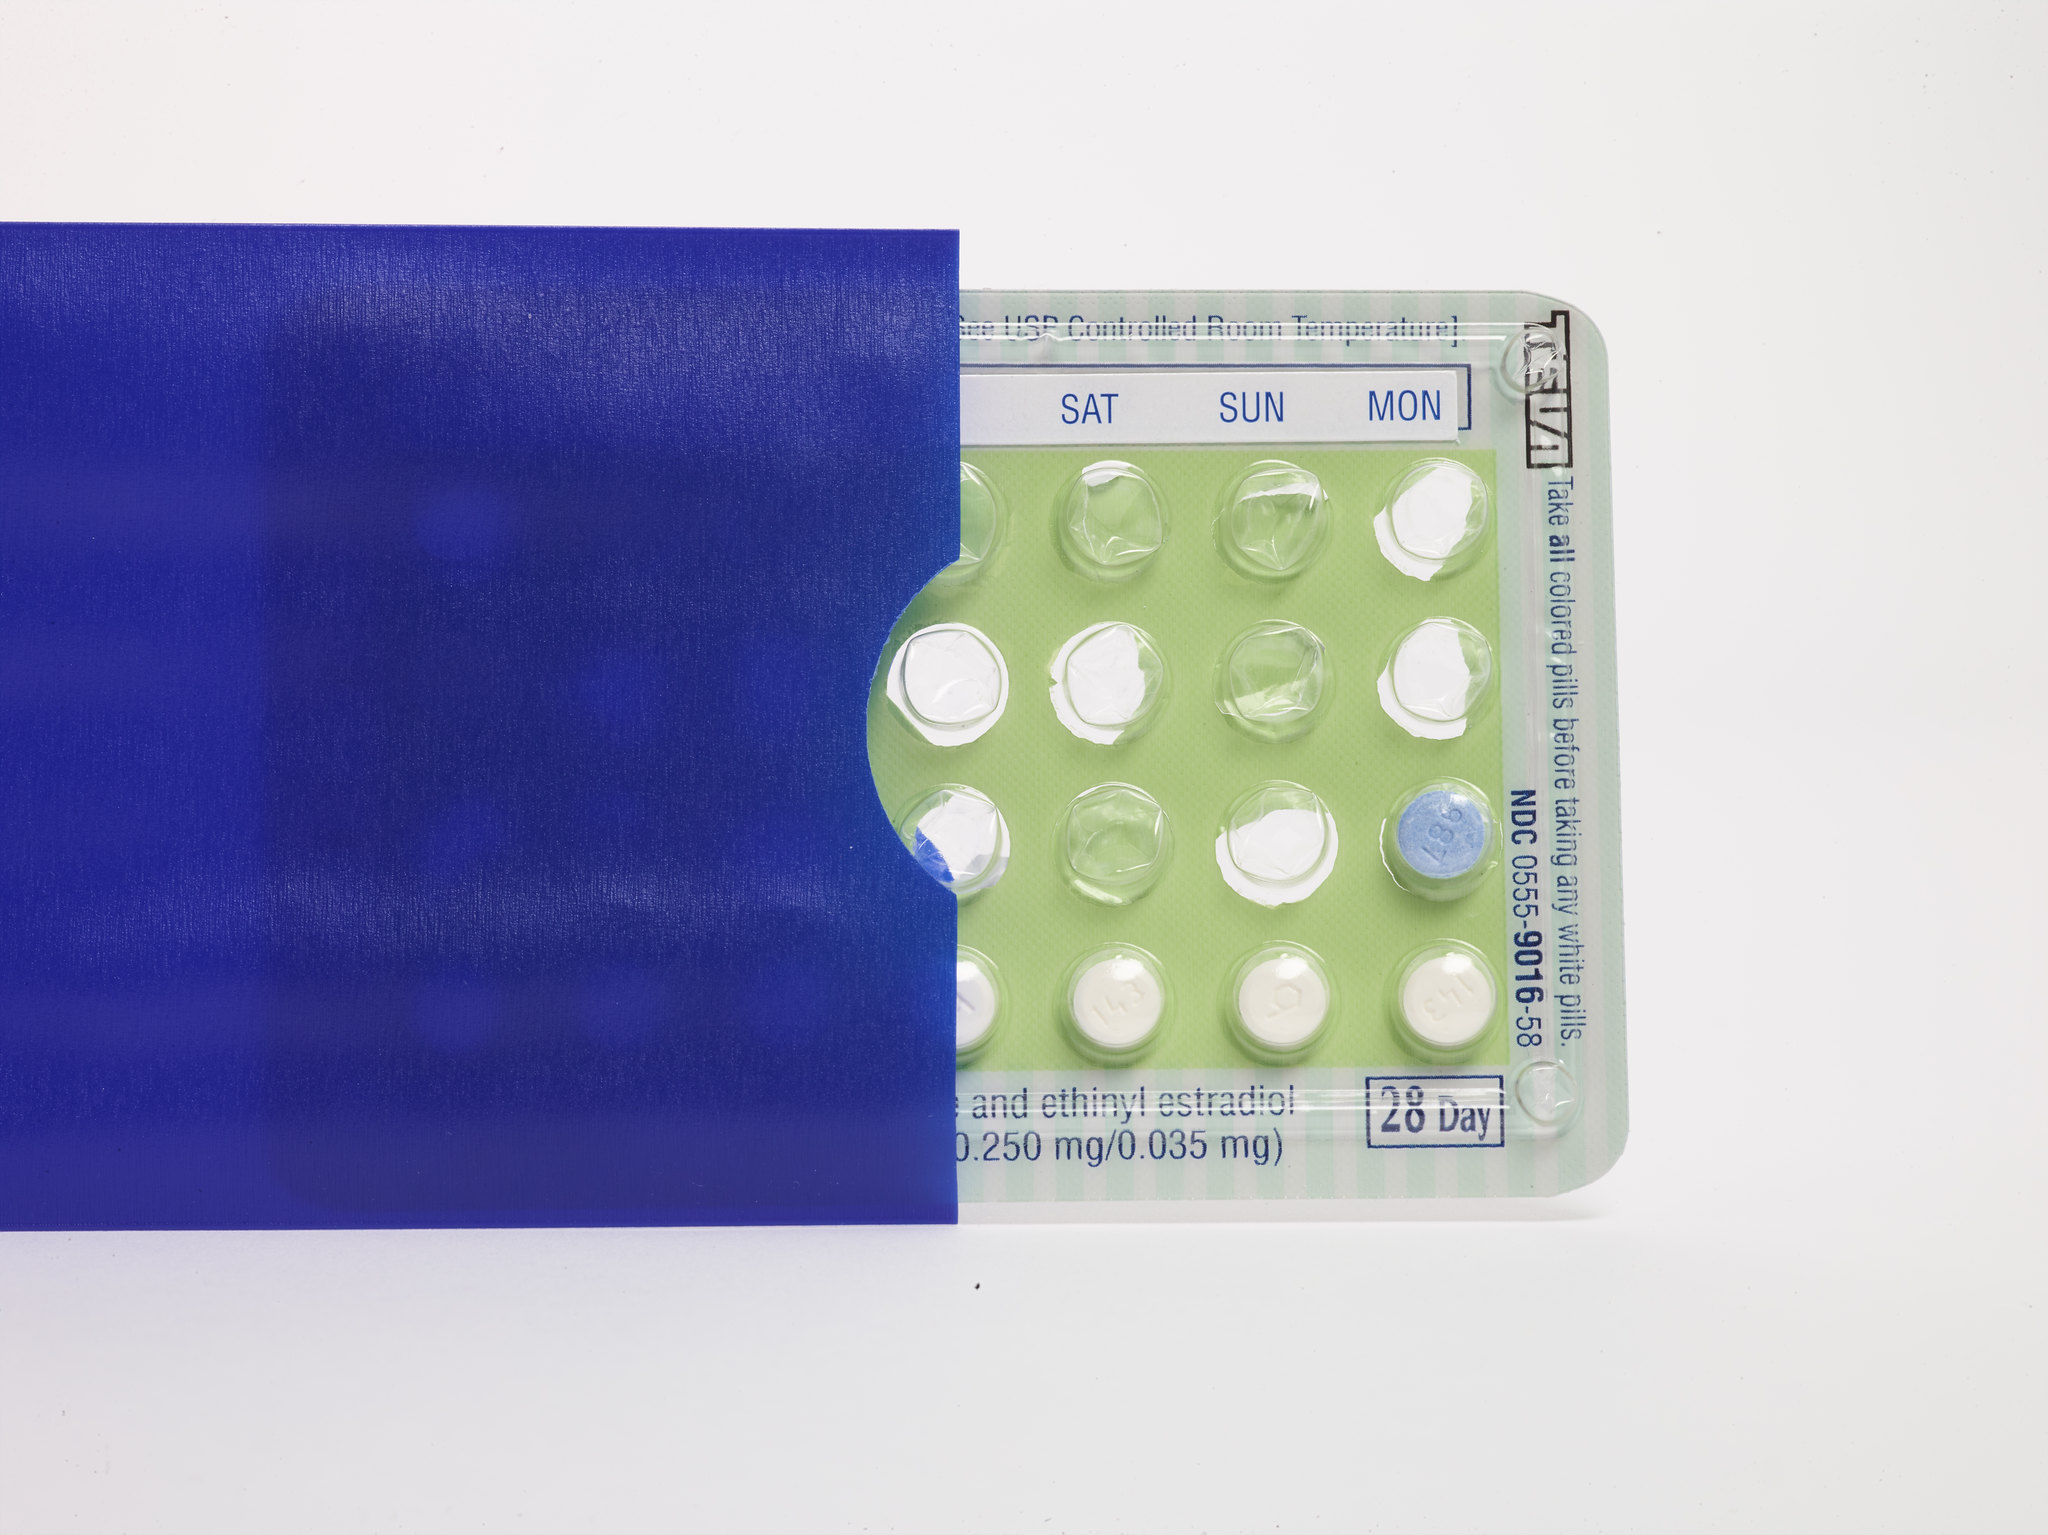 According to a study, all hormonal birth control increases the risk of ovarian tumors, but don’t allow the FDA to remind you.